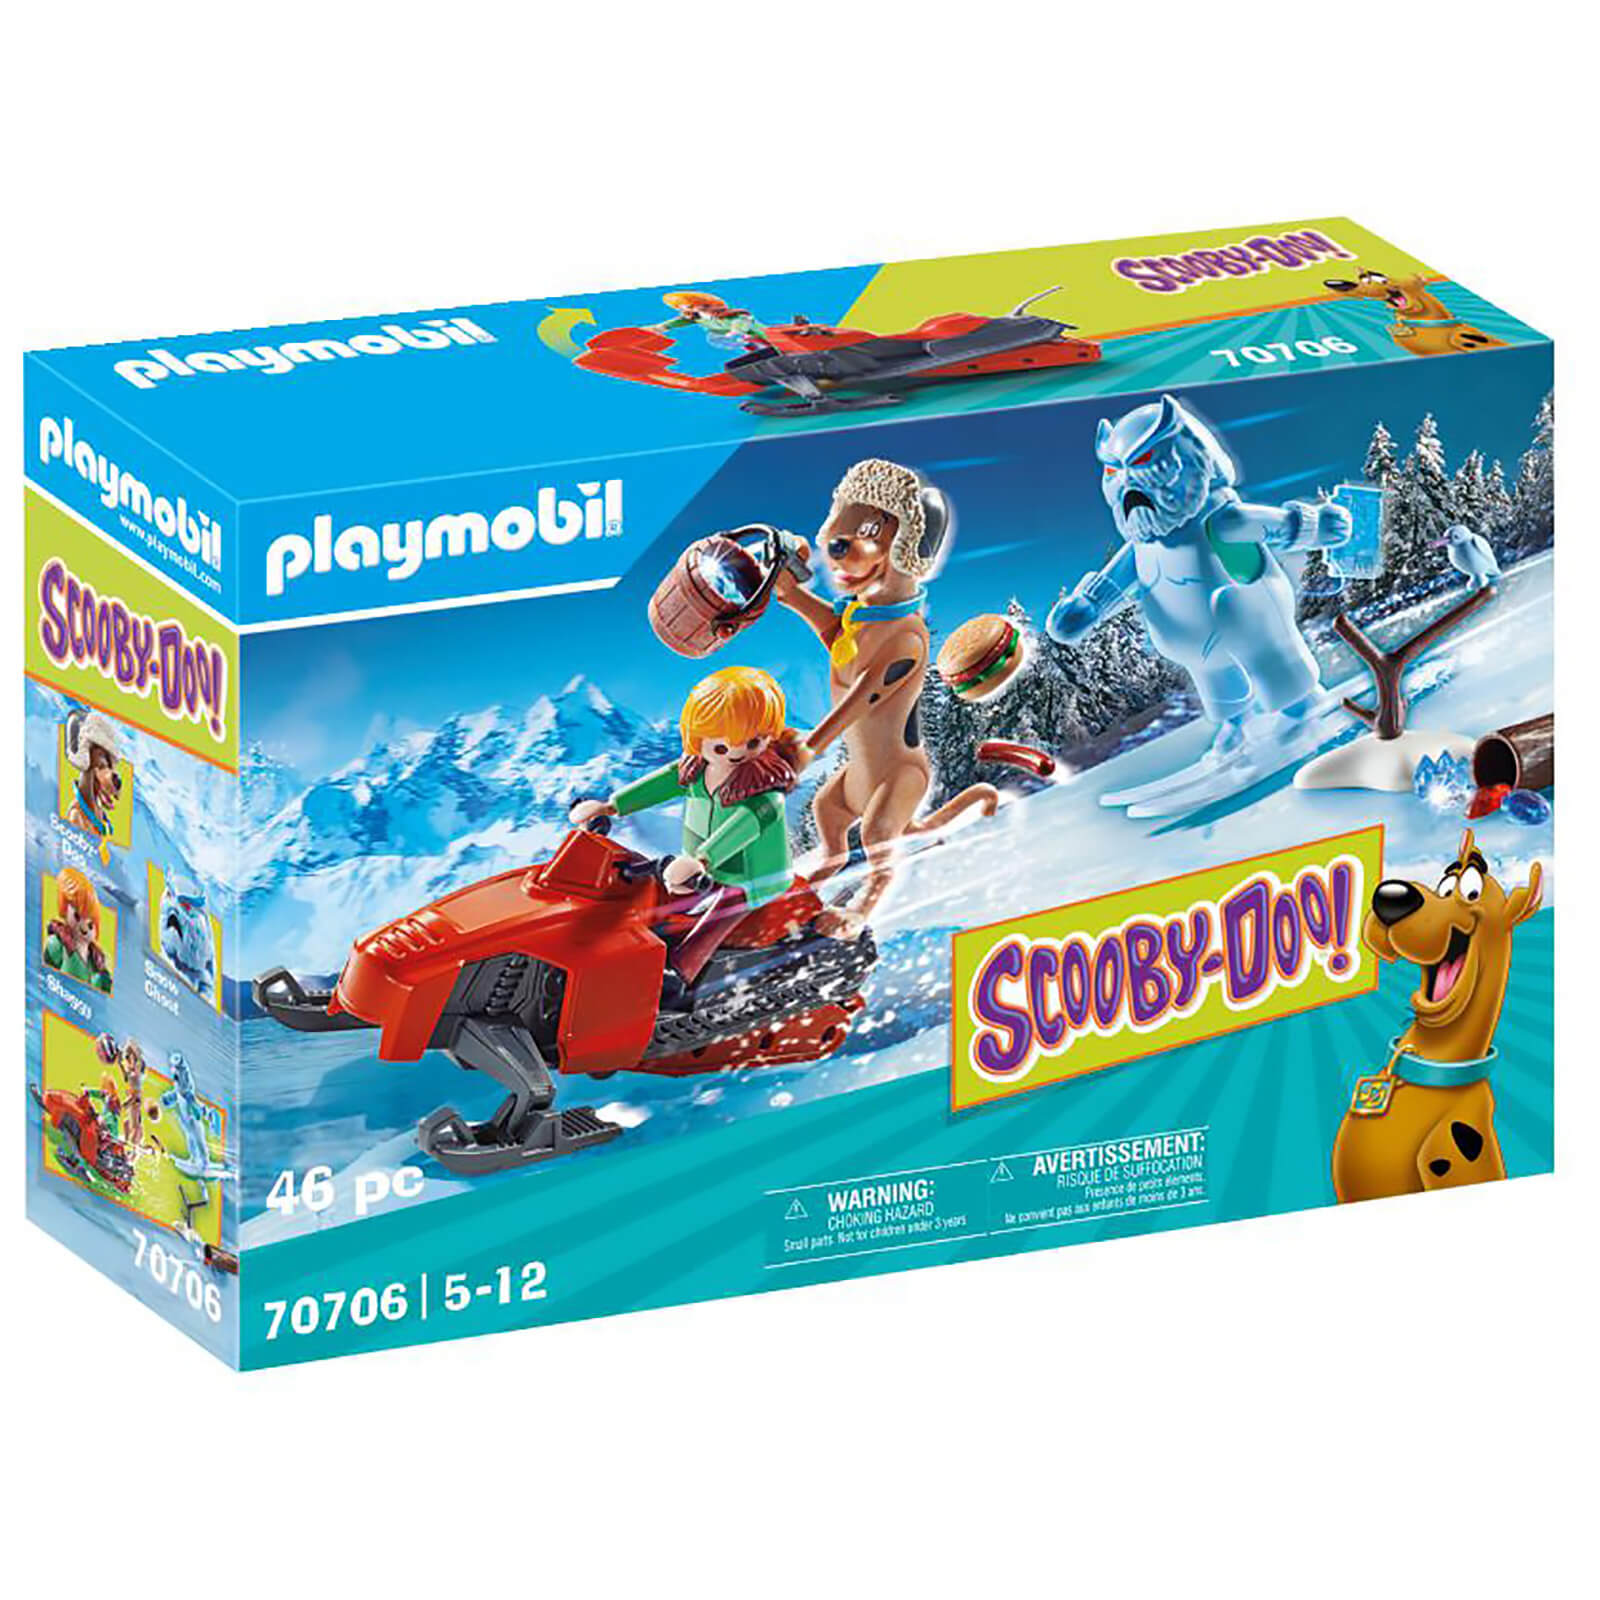 Playmobil SCOOBY-DOO! Adventure with Snow Ghost (70706)